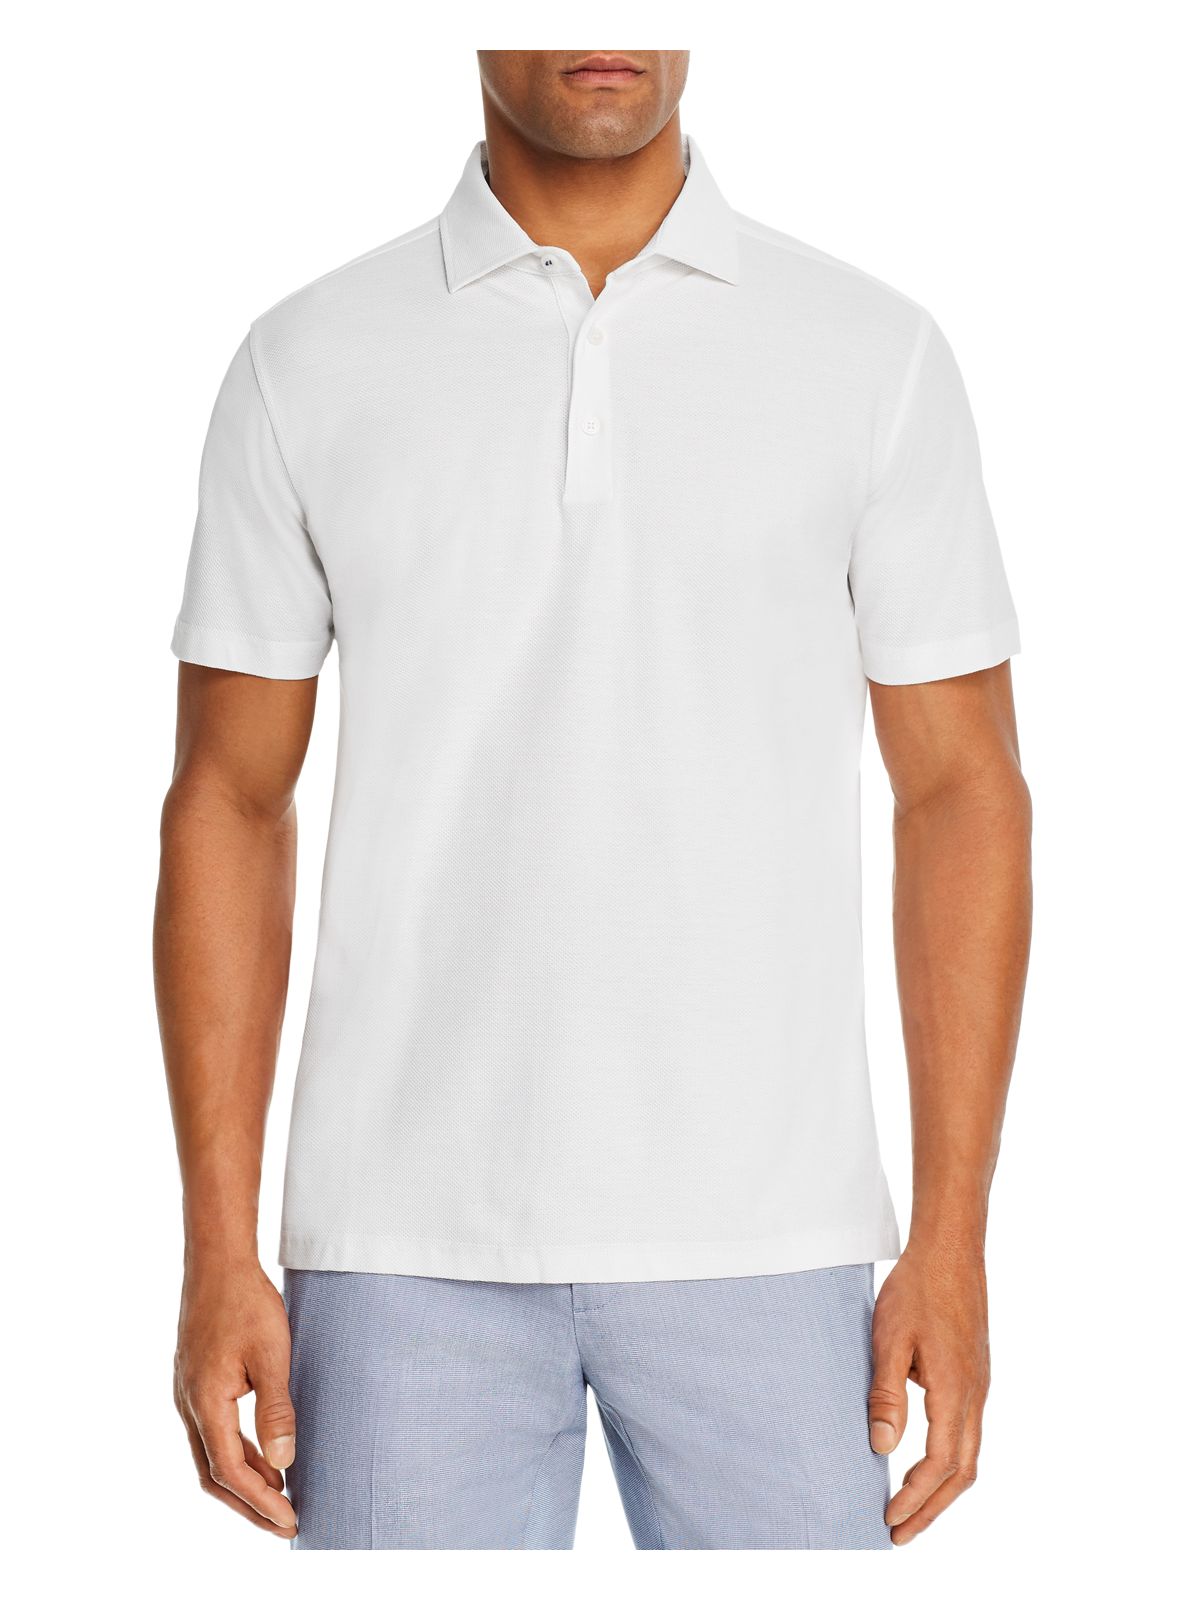 DYLAN GRAY Mens White Short Sleeve Classic Fit Polo S